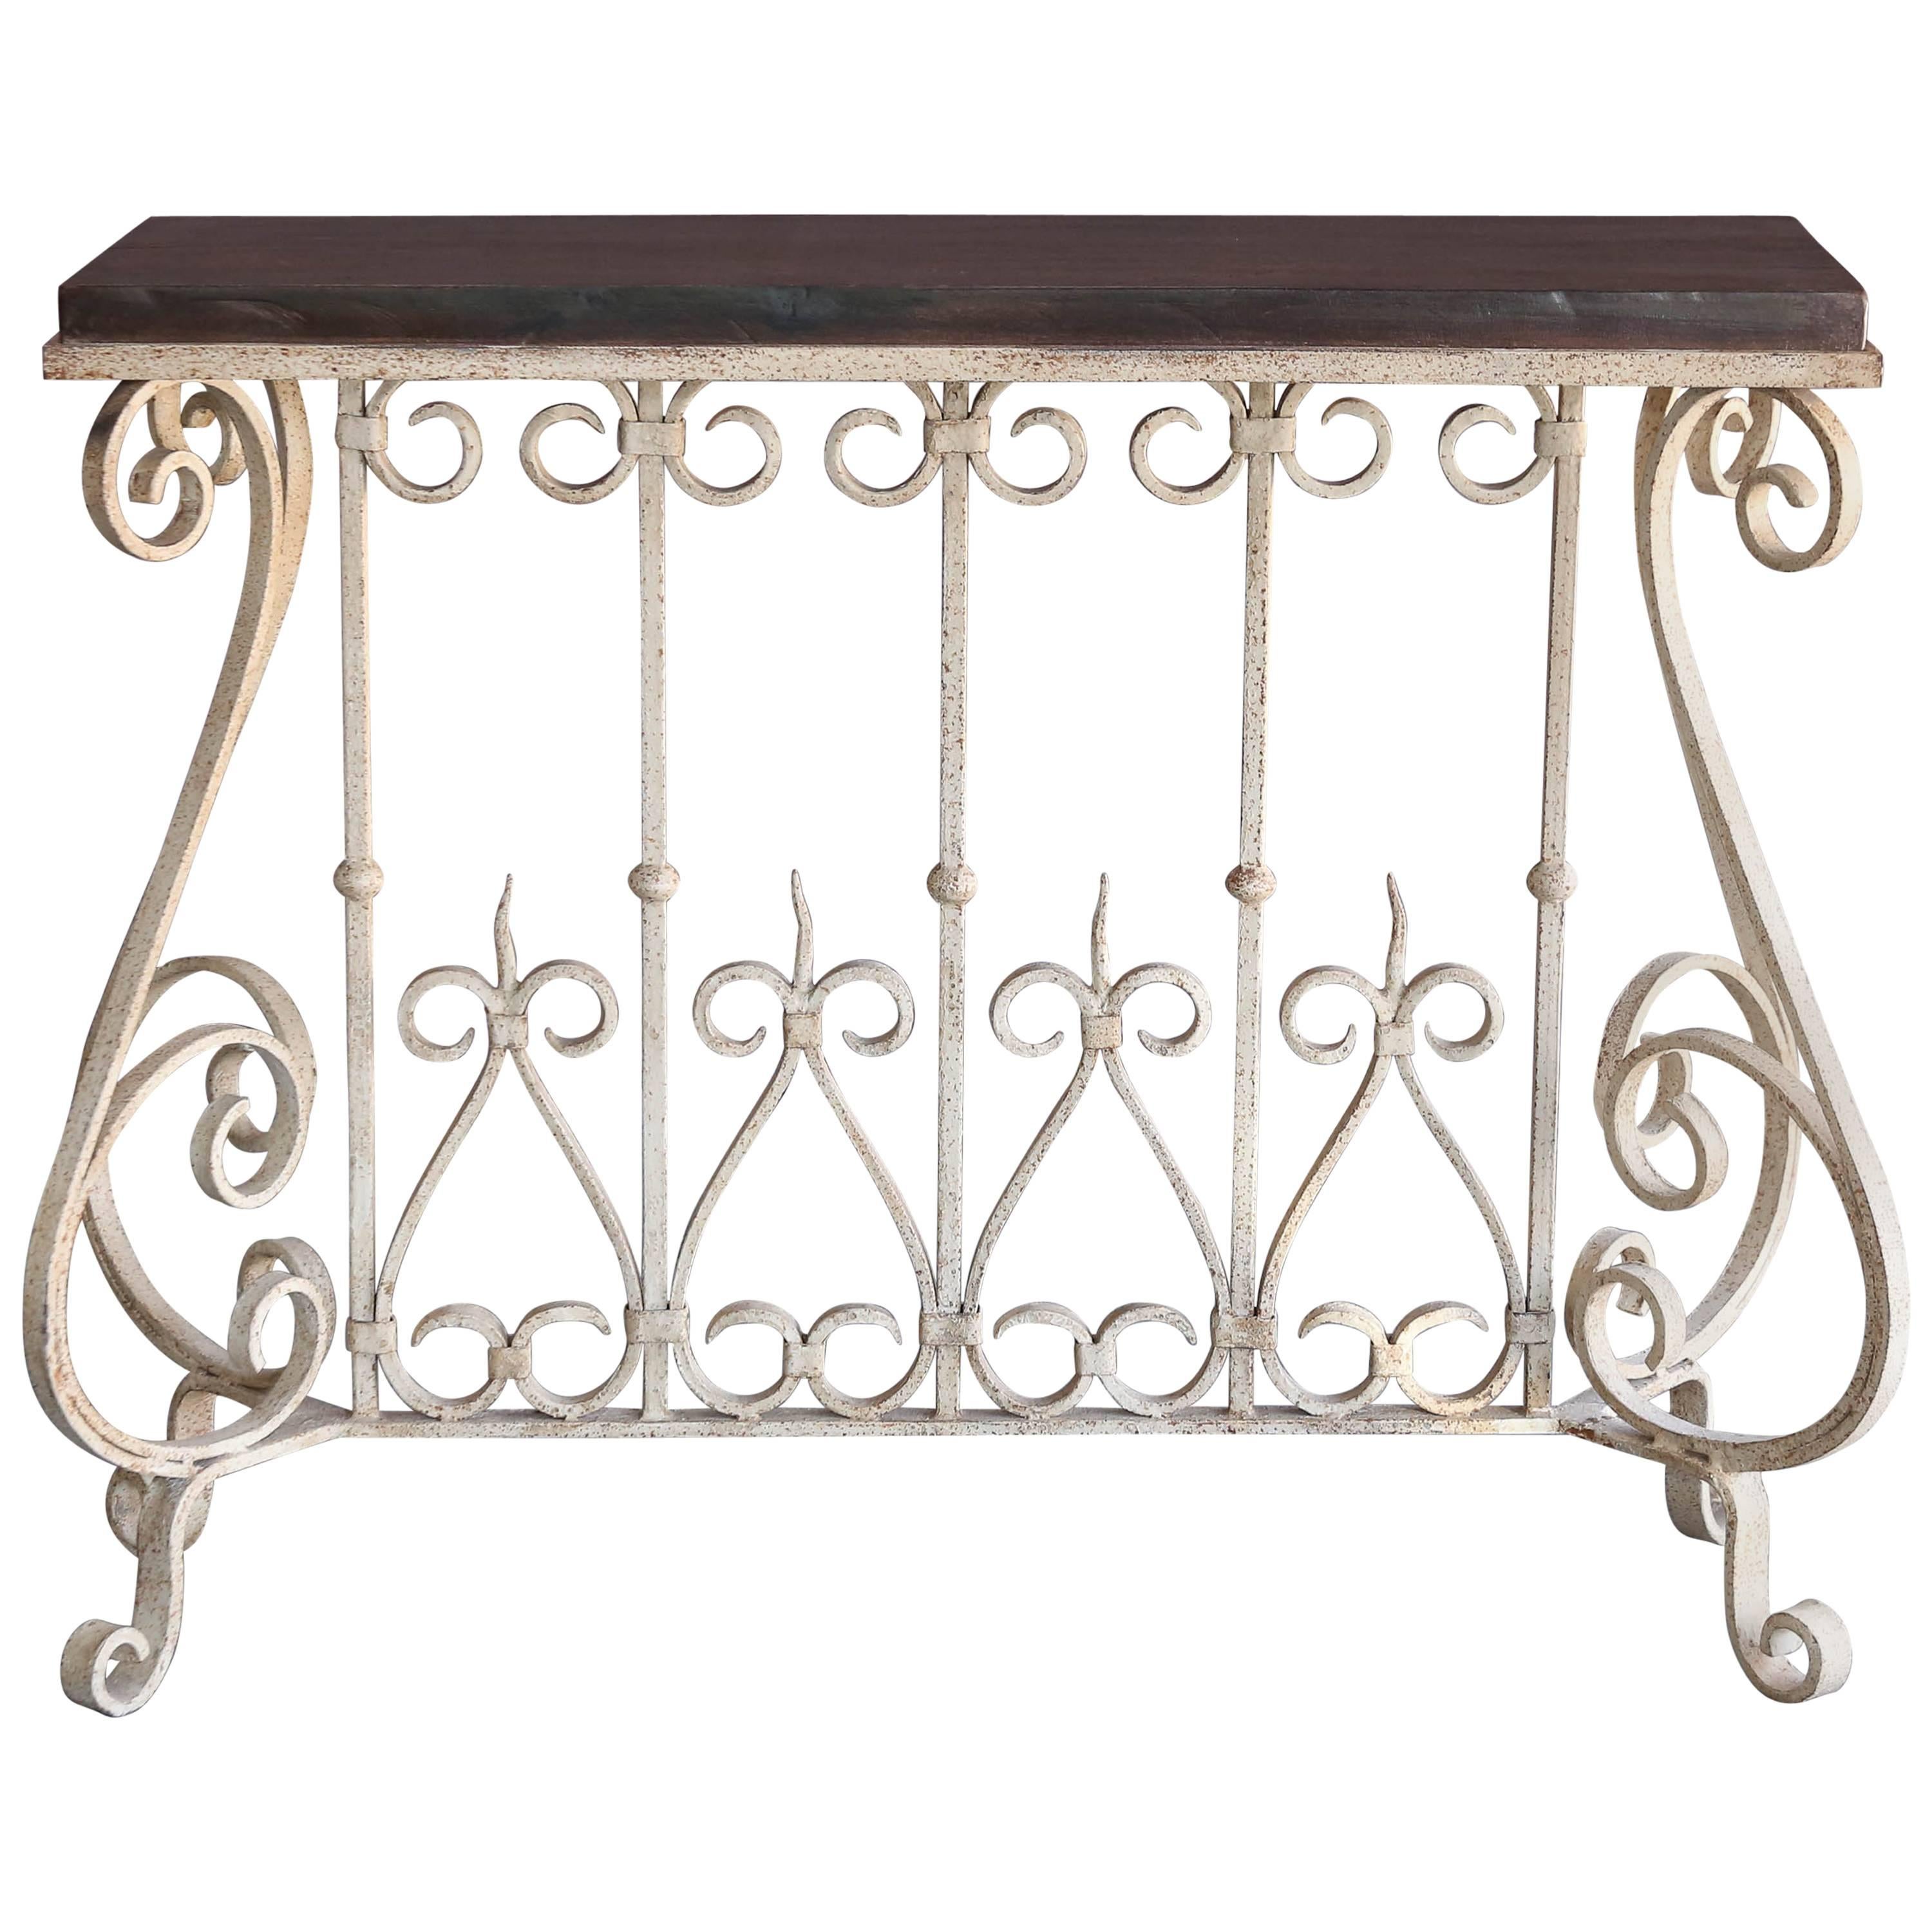 1910s Solid Teak Wood and Hand-Forged Wrought Iron Decorative Console Table For Sale